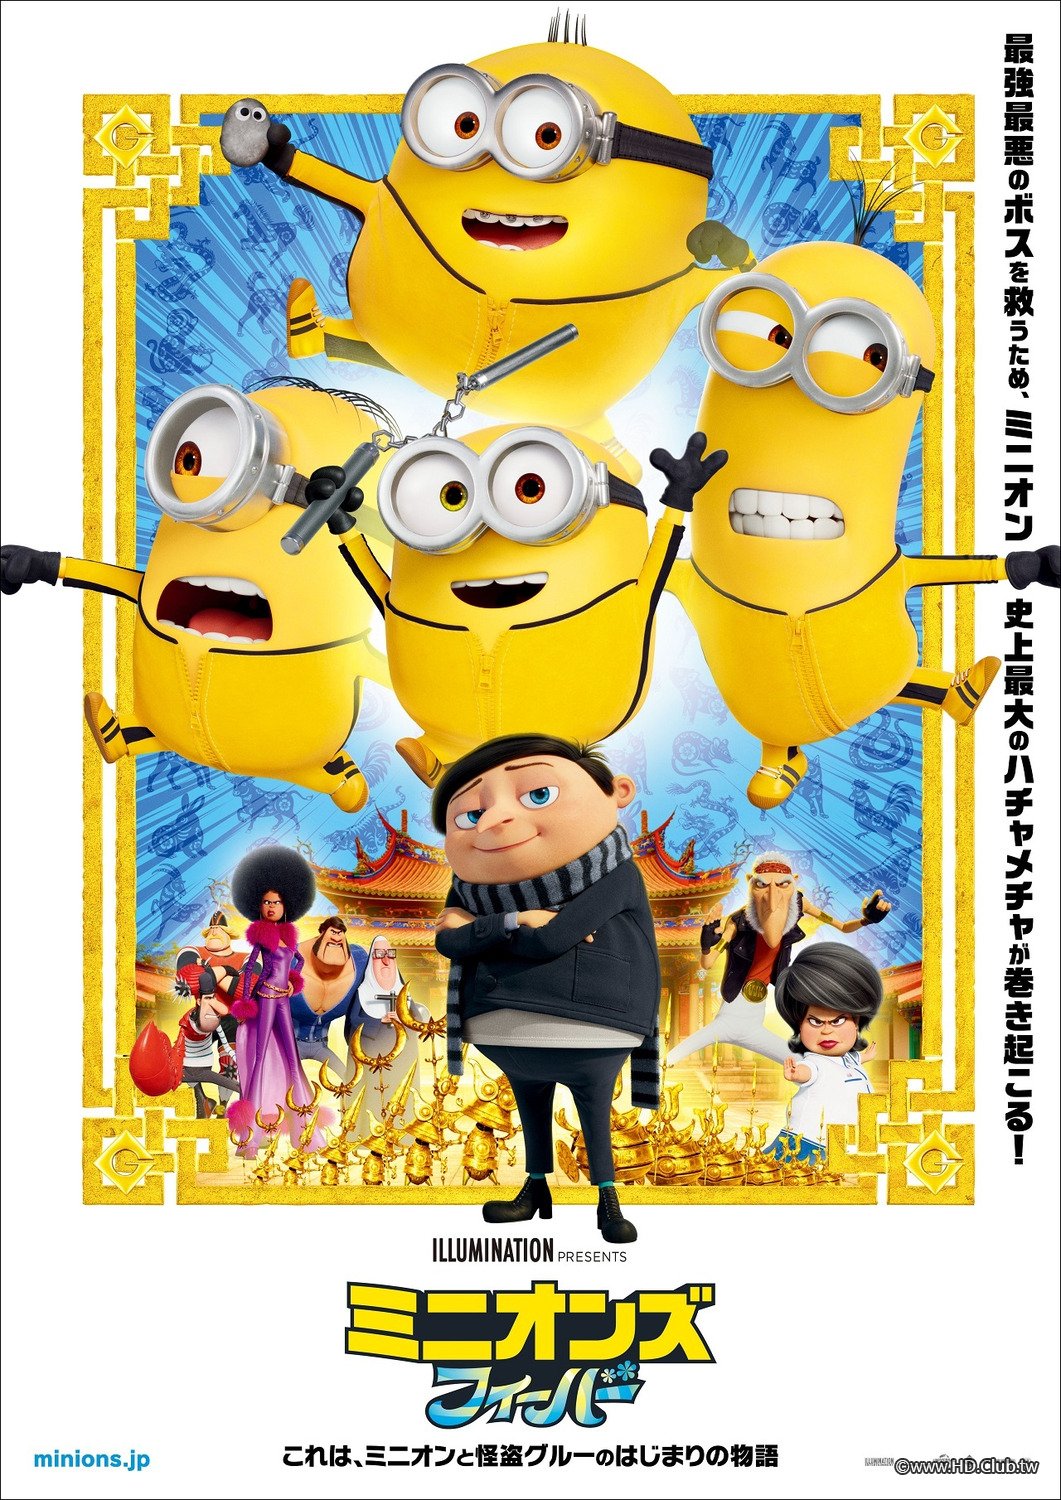 minions_the_rise_of_gru_ver5_xlg.jpg